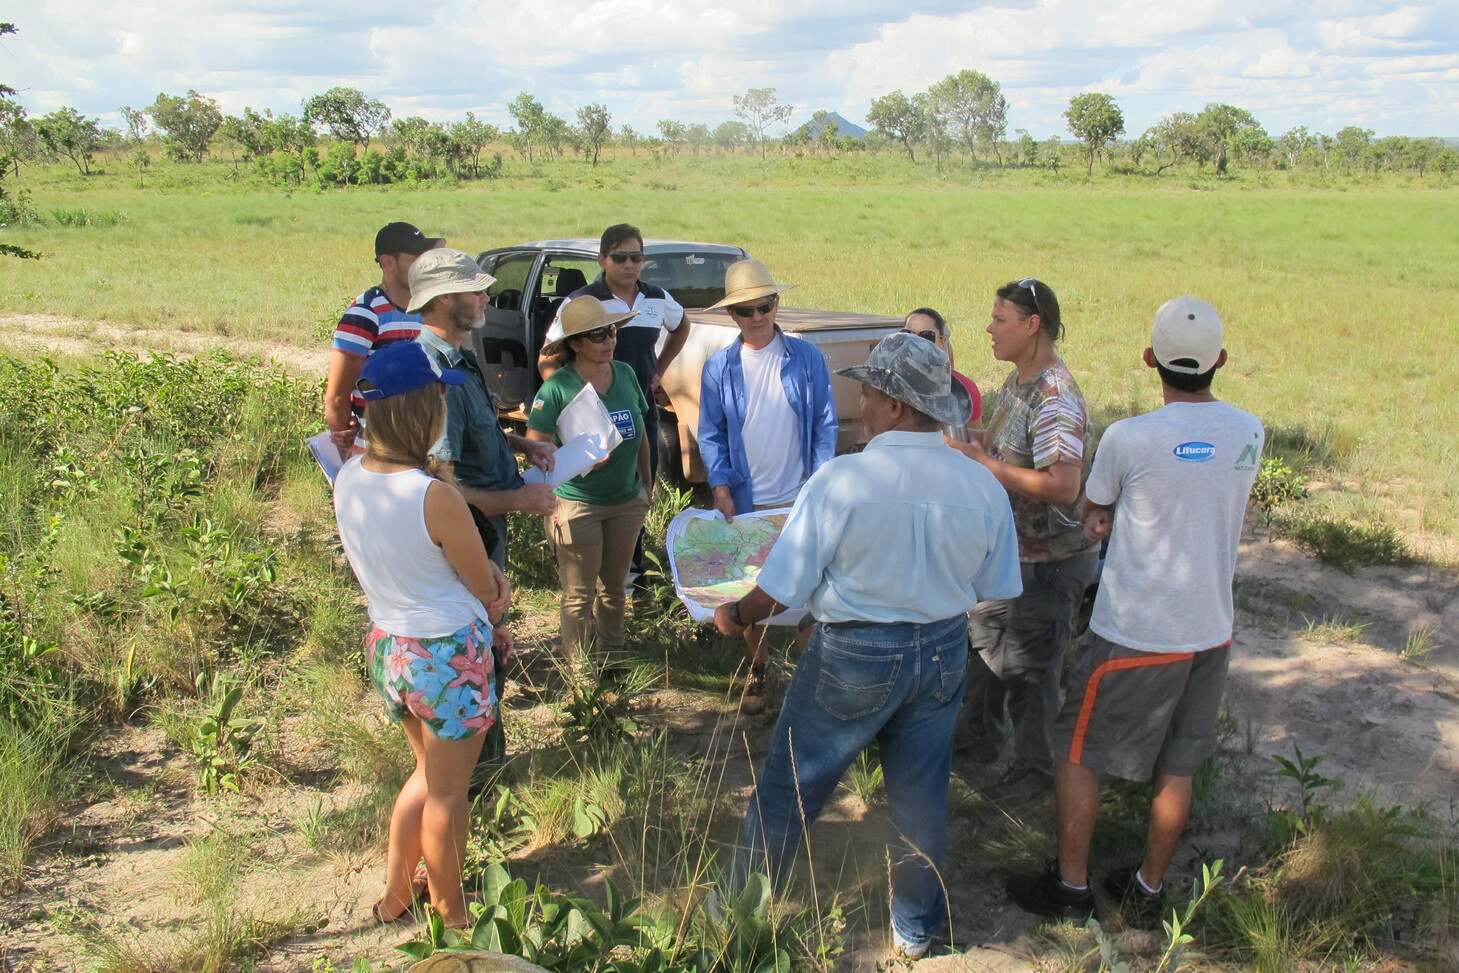 A group of people standing at the edge of a field; some are holding maps. Copyright: GIZ Brazil